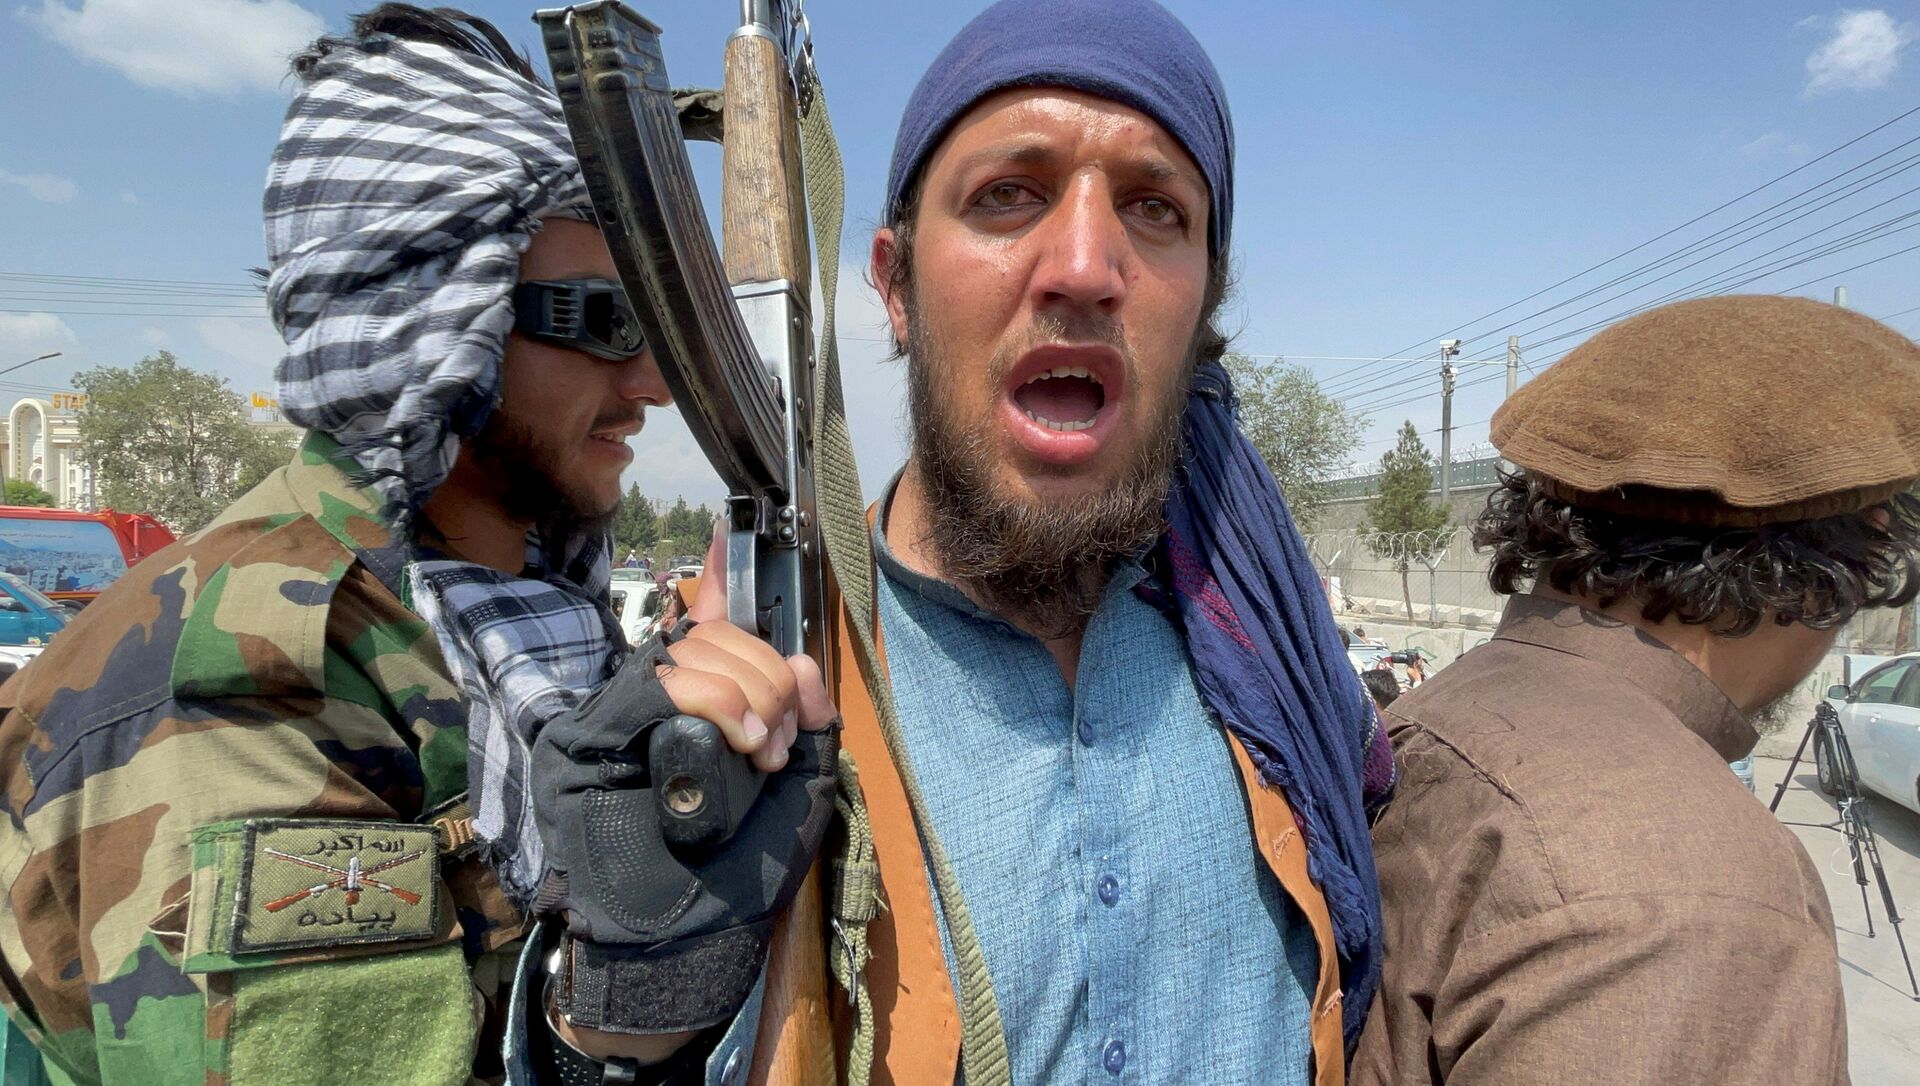 Taliban forces patrol near the entrance gate of Hamid Karzai International Airport, a day after U.S troops withdrawal, in Kabul - Sputnik International, 1920, 01.09.2021